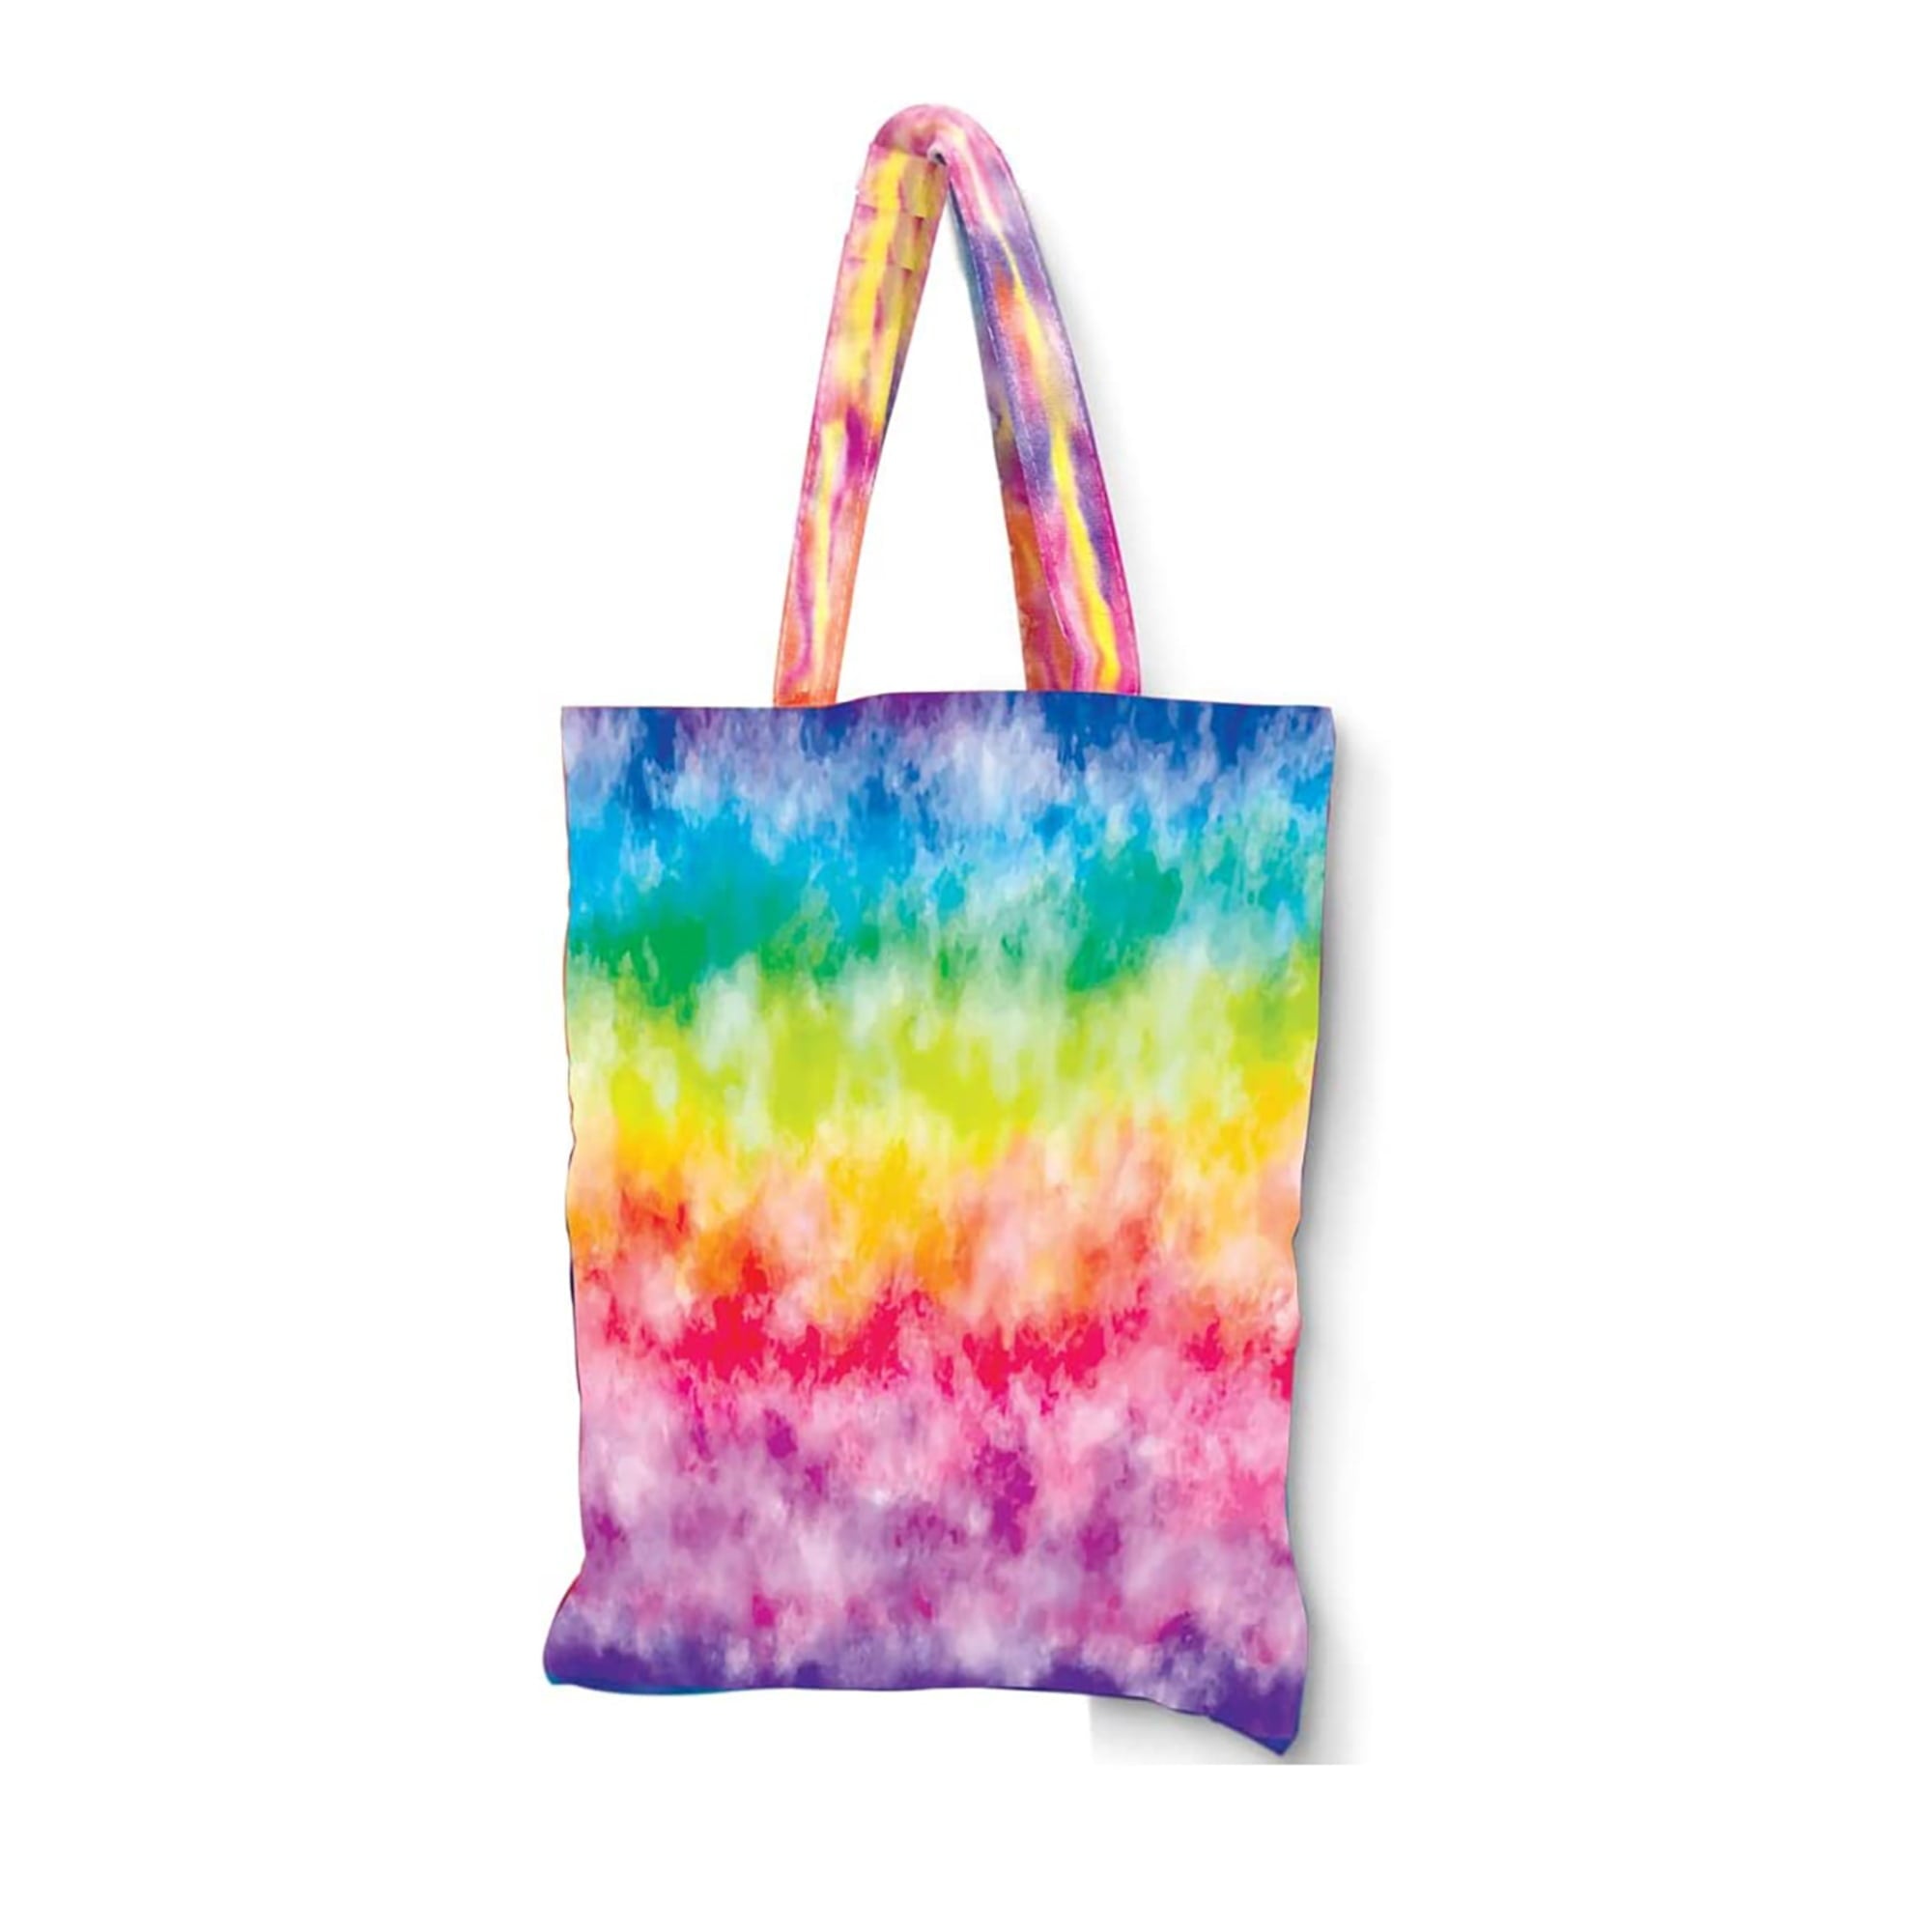 AMAV Fashion Time Trendy Tie Dye Bag, A Creative and Fashionable Activity Kit, Children Ages 8 Years and Up